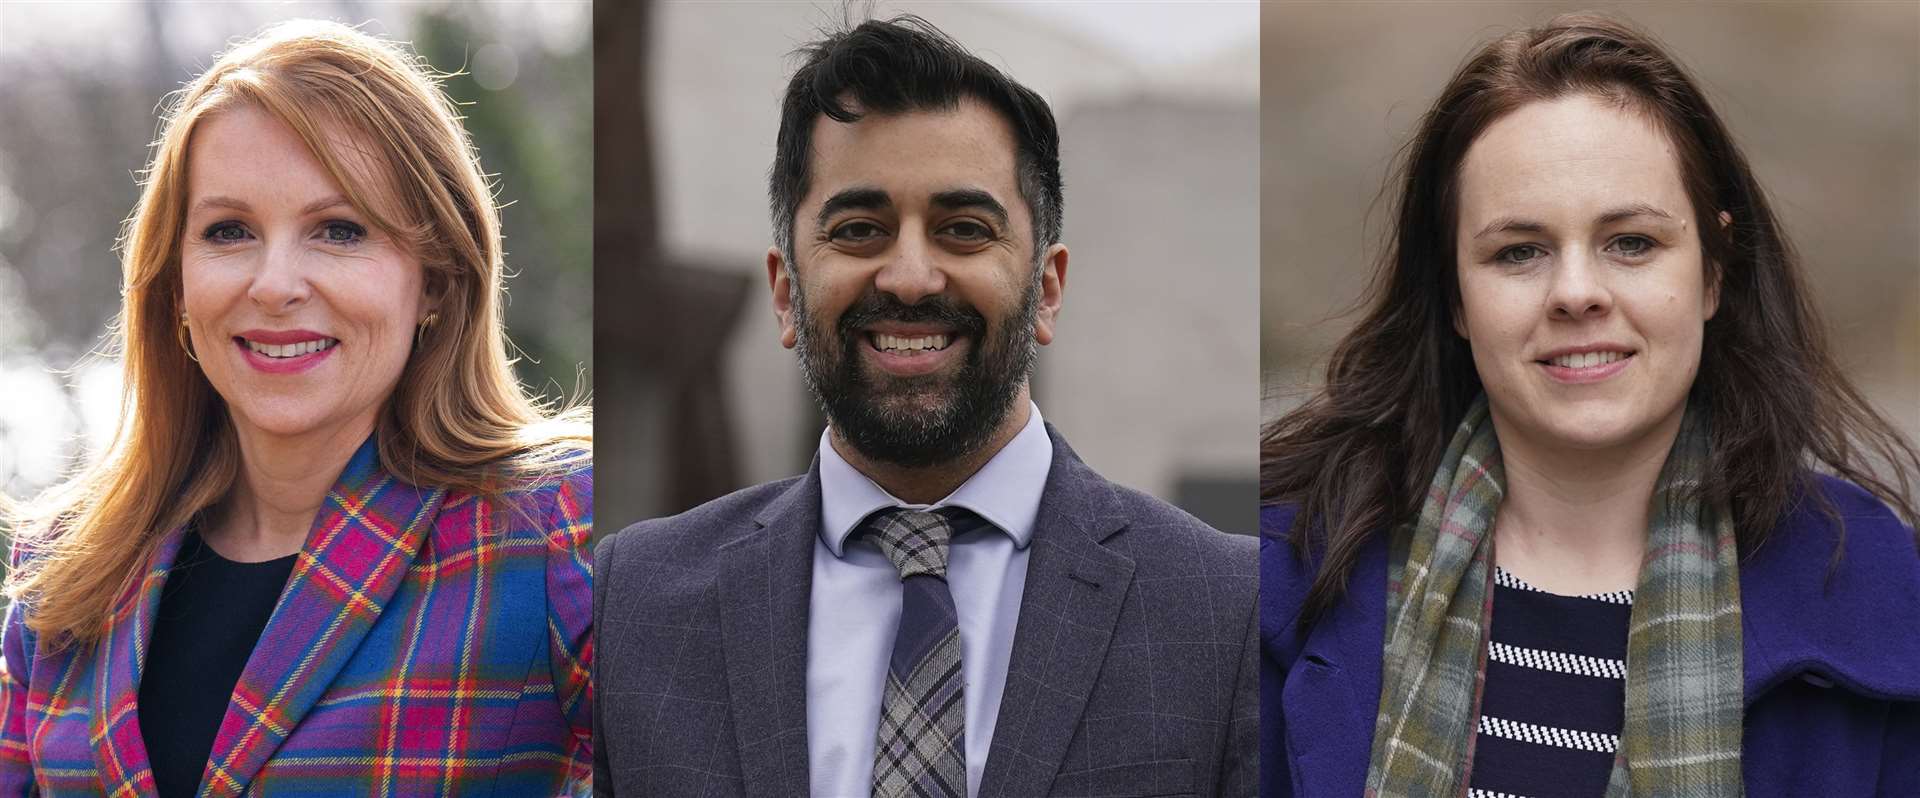 Three candidates are running to take over from Nicola Sturgeon as SNP leader and Scottish First Minister – Ash Regan, Humza Yousaf and Kate Forbes (Jane Barlow/Andrew Milligan/PA)